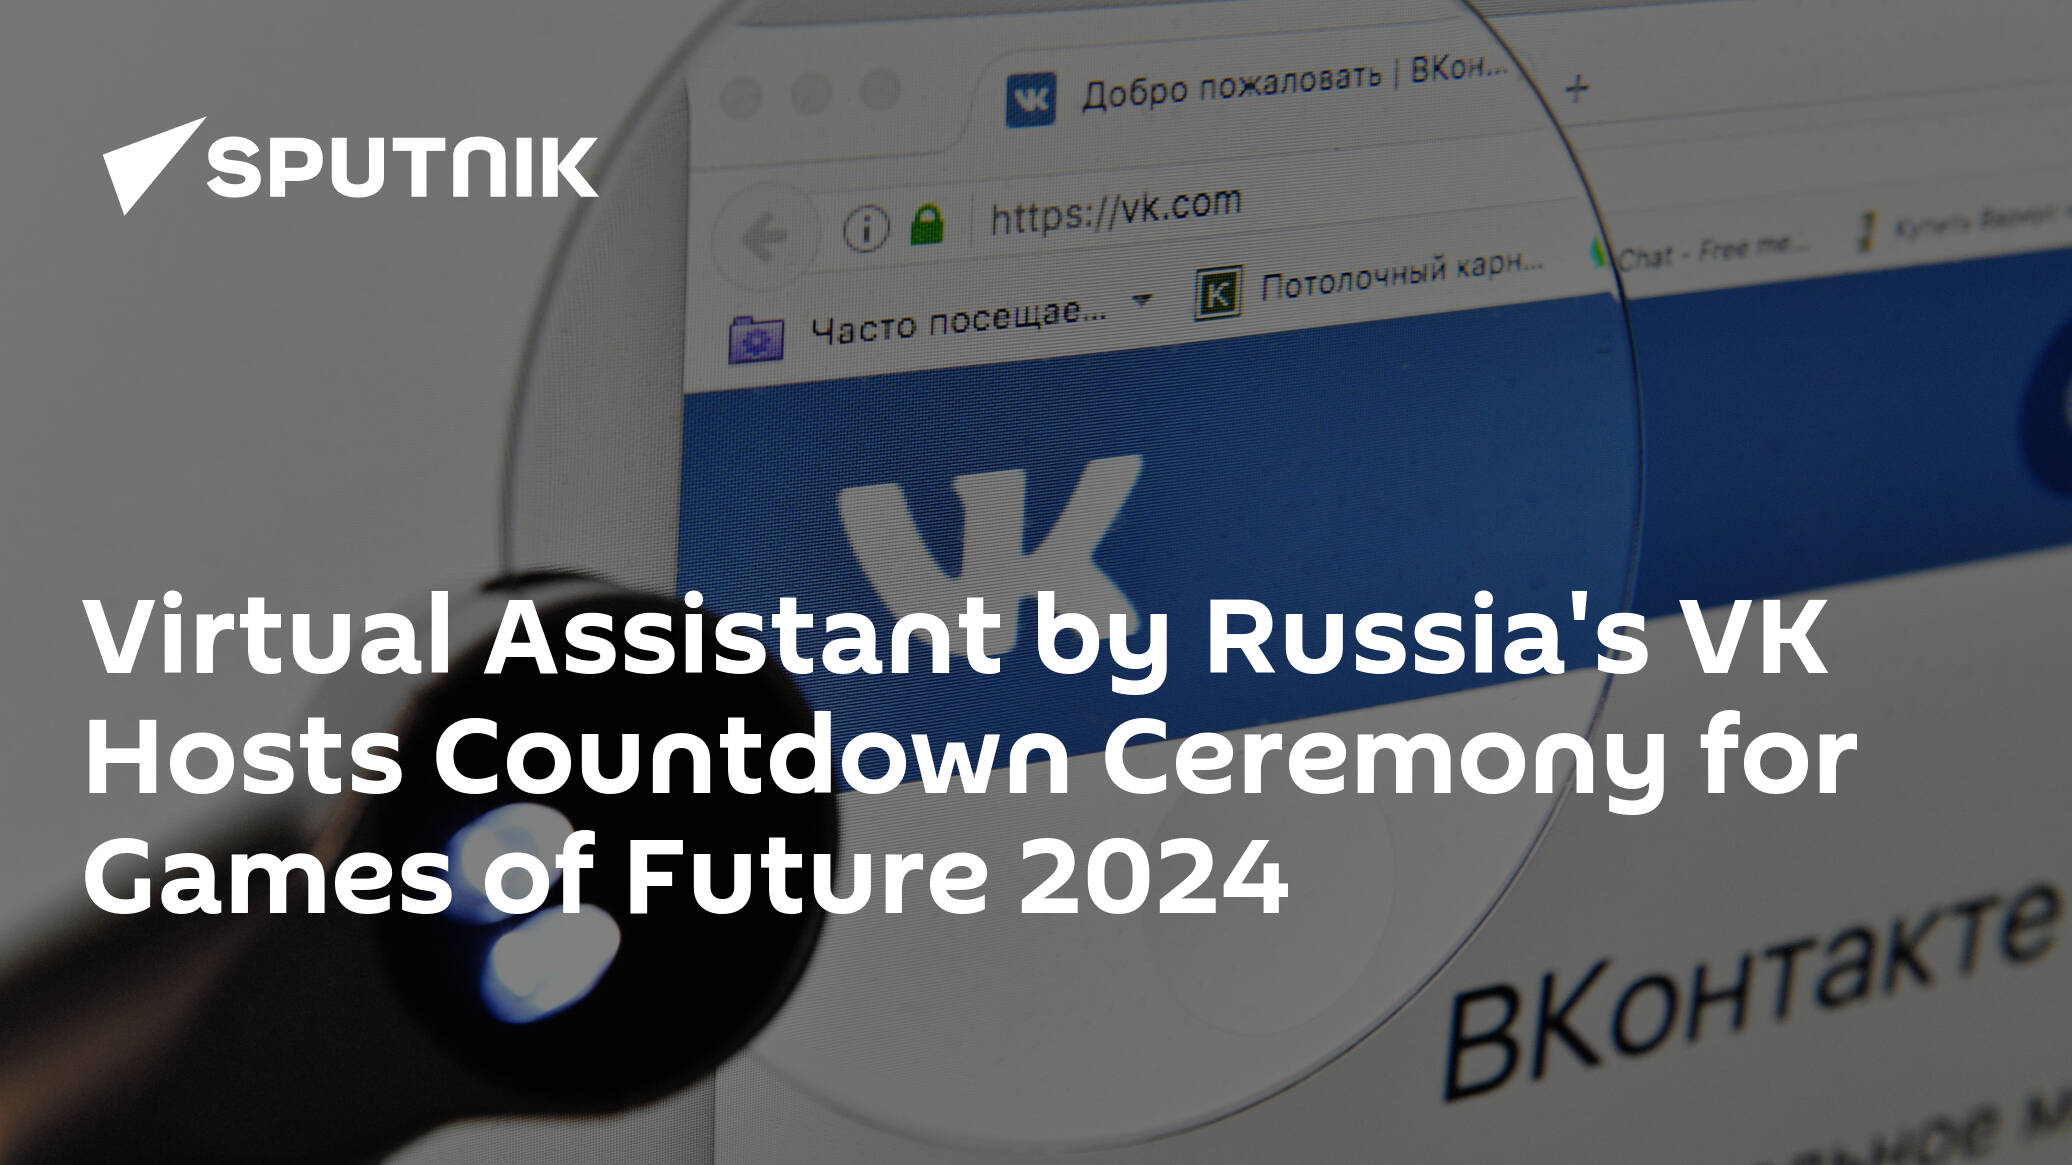 Virtual Assistant by Russia's VK Hosts Countdown Ceremony for Games of Future 2024